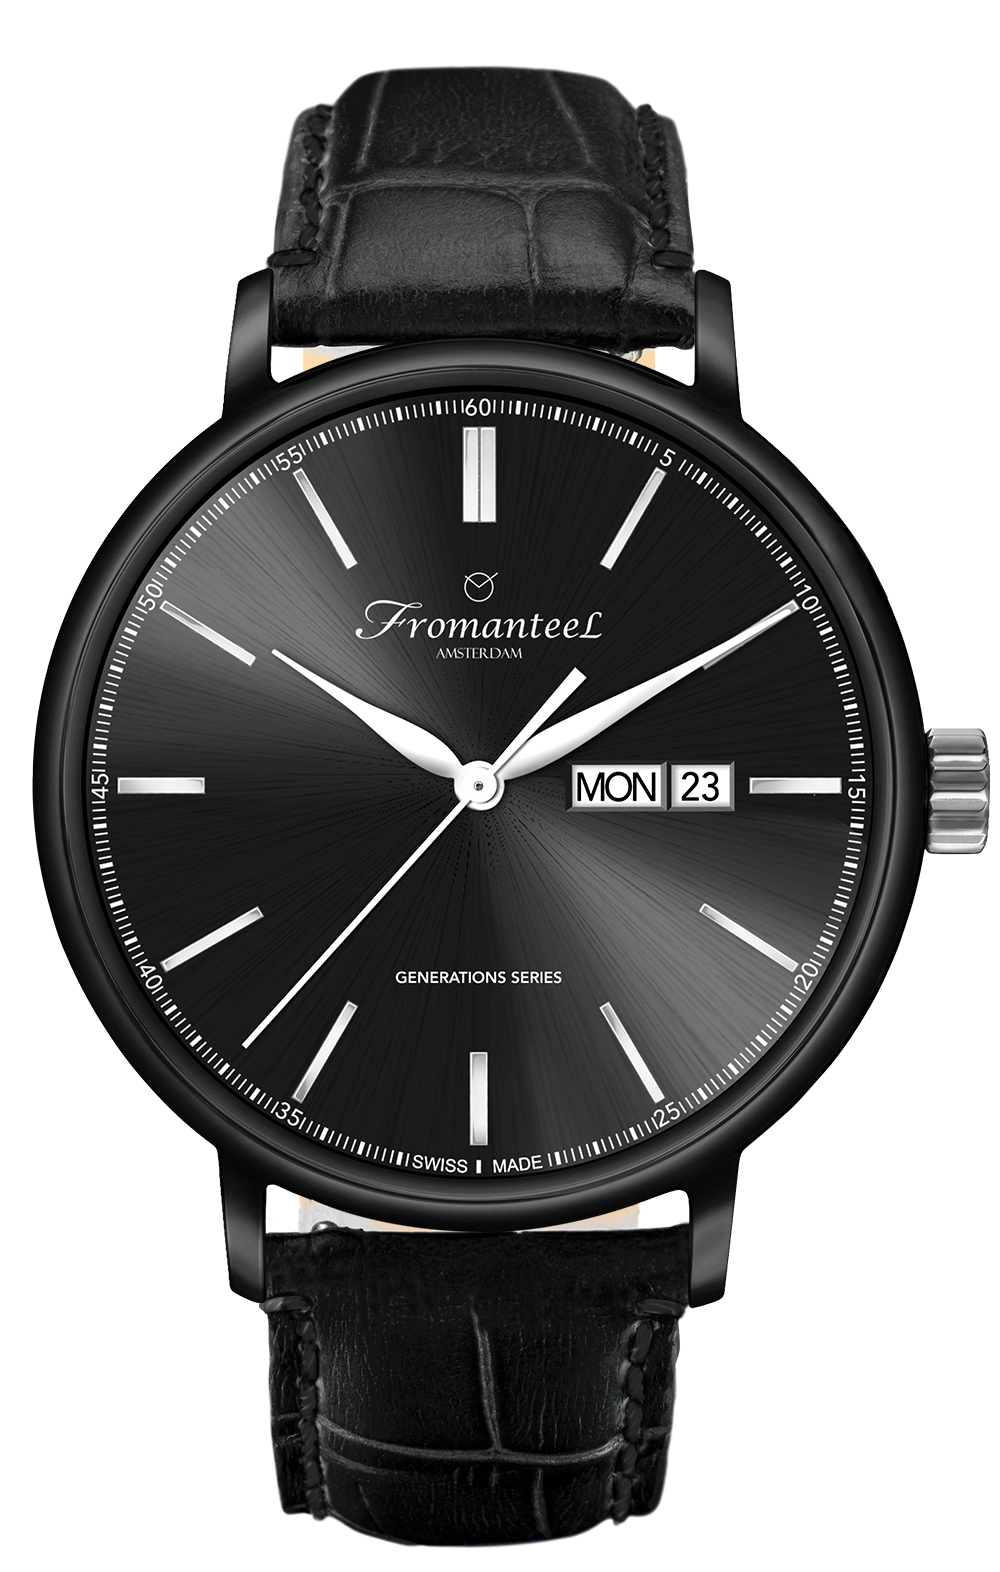 Swiss Made Men's Watch Fromanteel Generations Day-Date Black PVD Nero